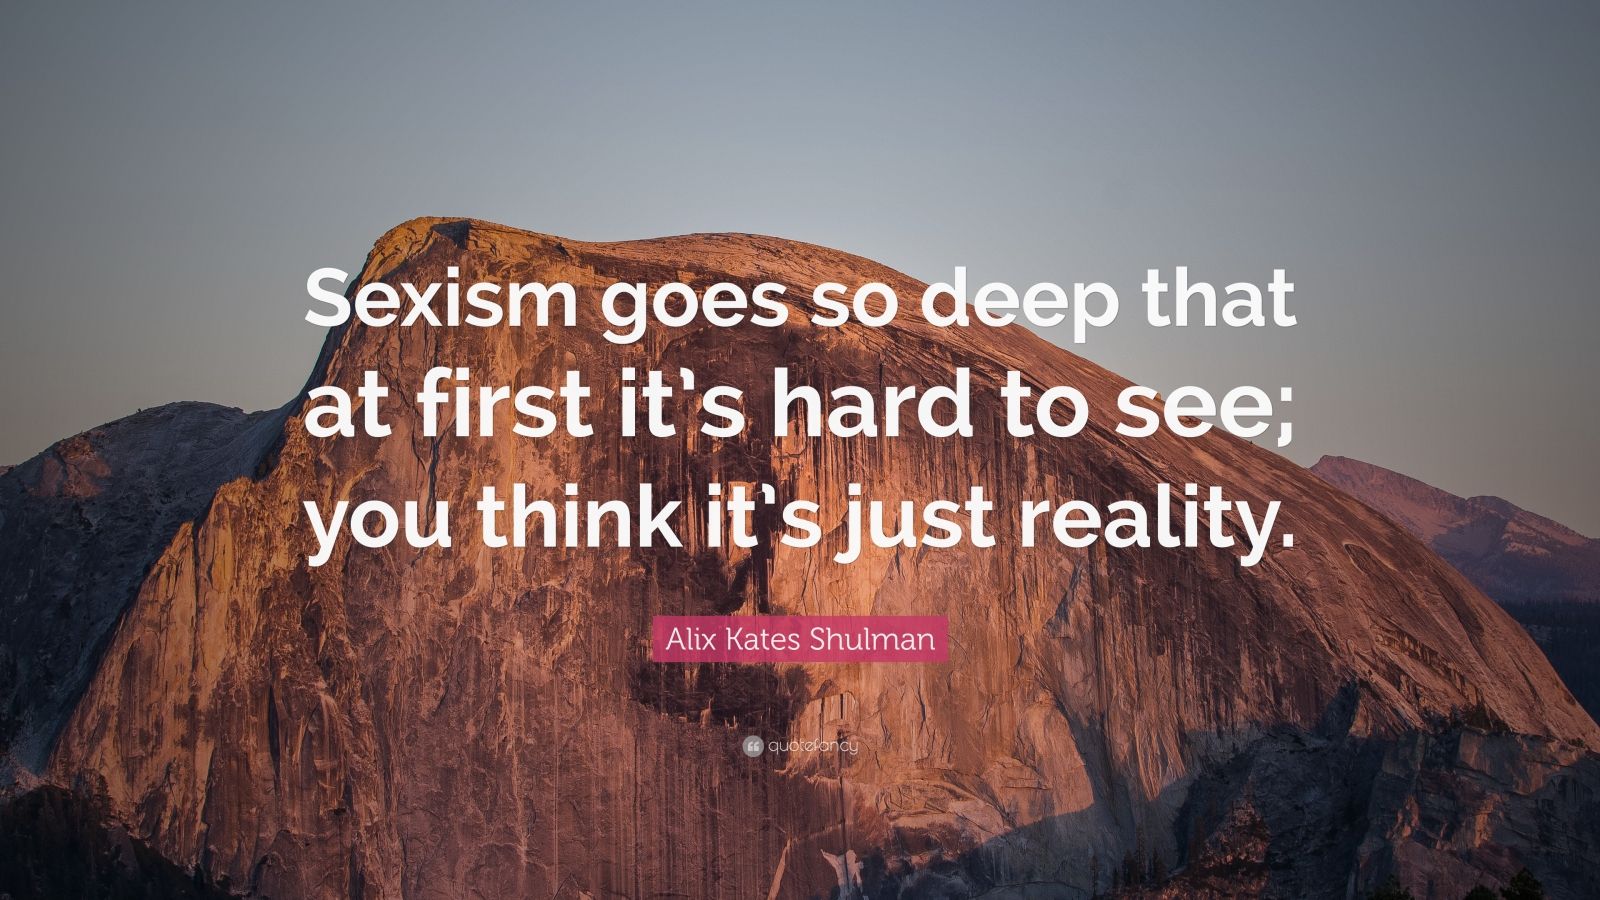 Alix Kates Shulman Quote “sexism Goes So Deep That At First Its Hard To See You Think Its 8080